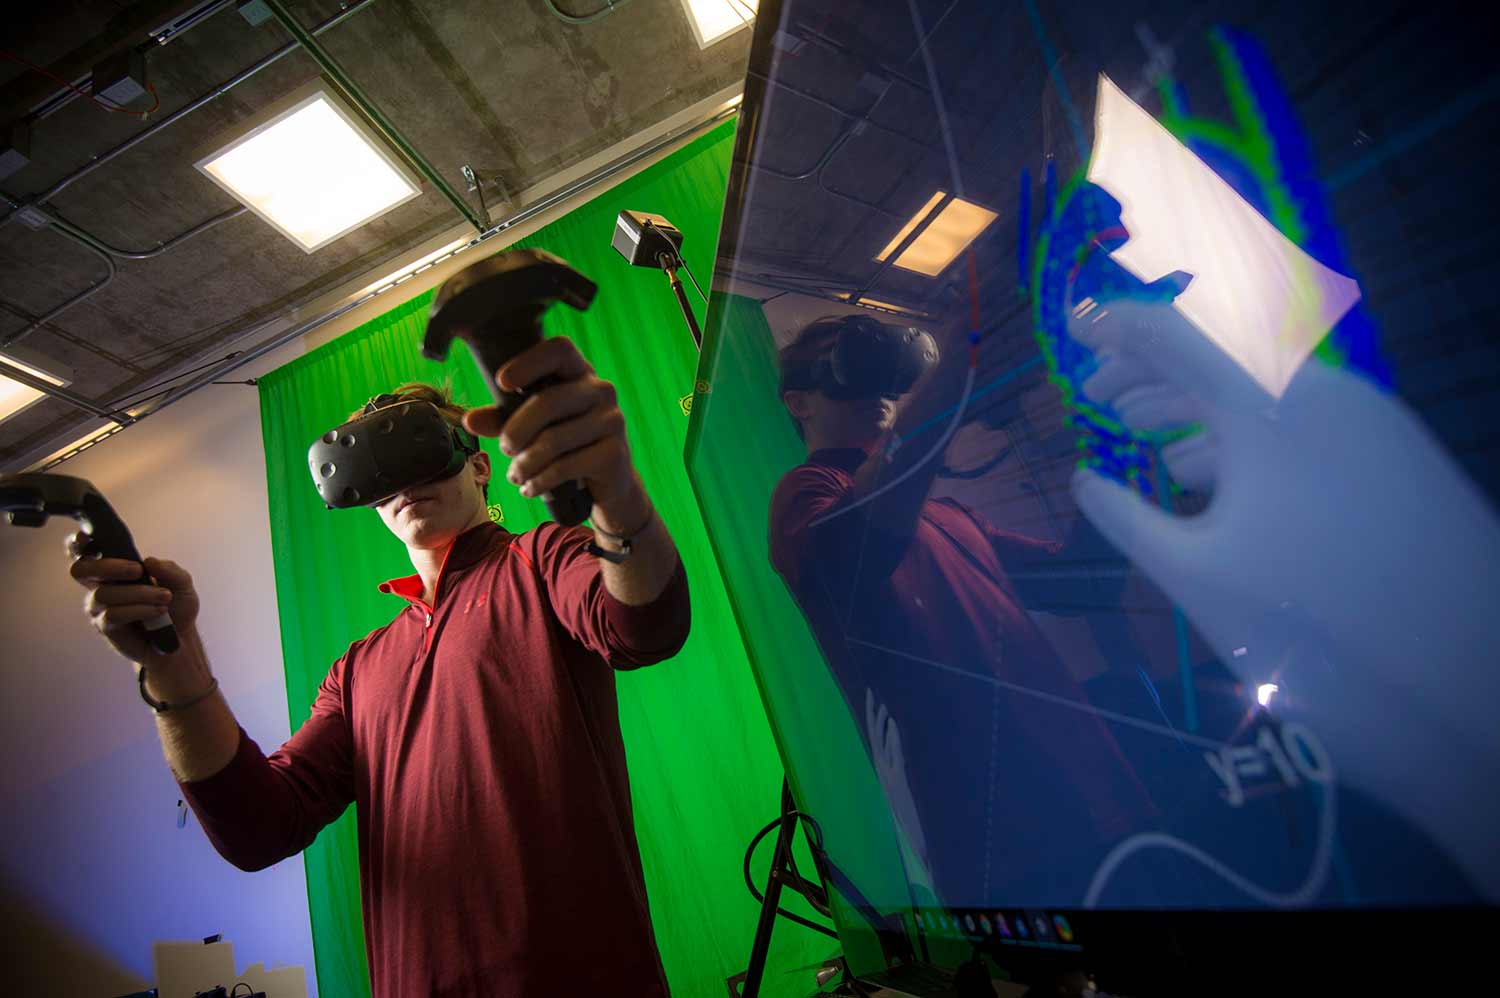 Steven McCloskey, co-founder of a new virtual reality startup, manipulates objects in an immersive environment.